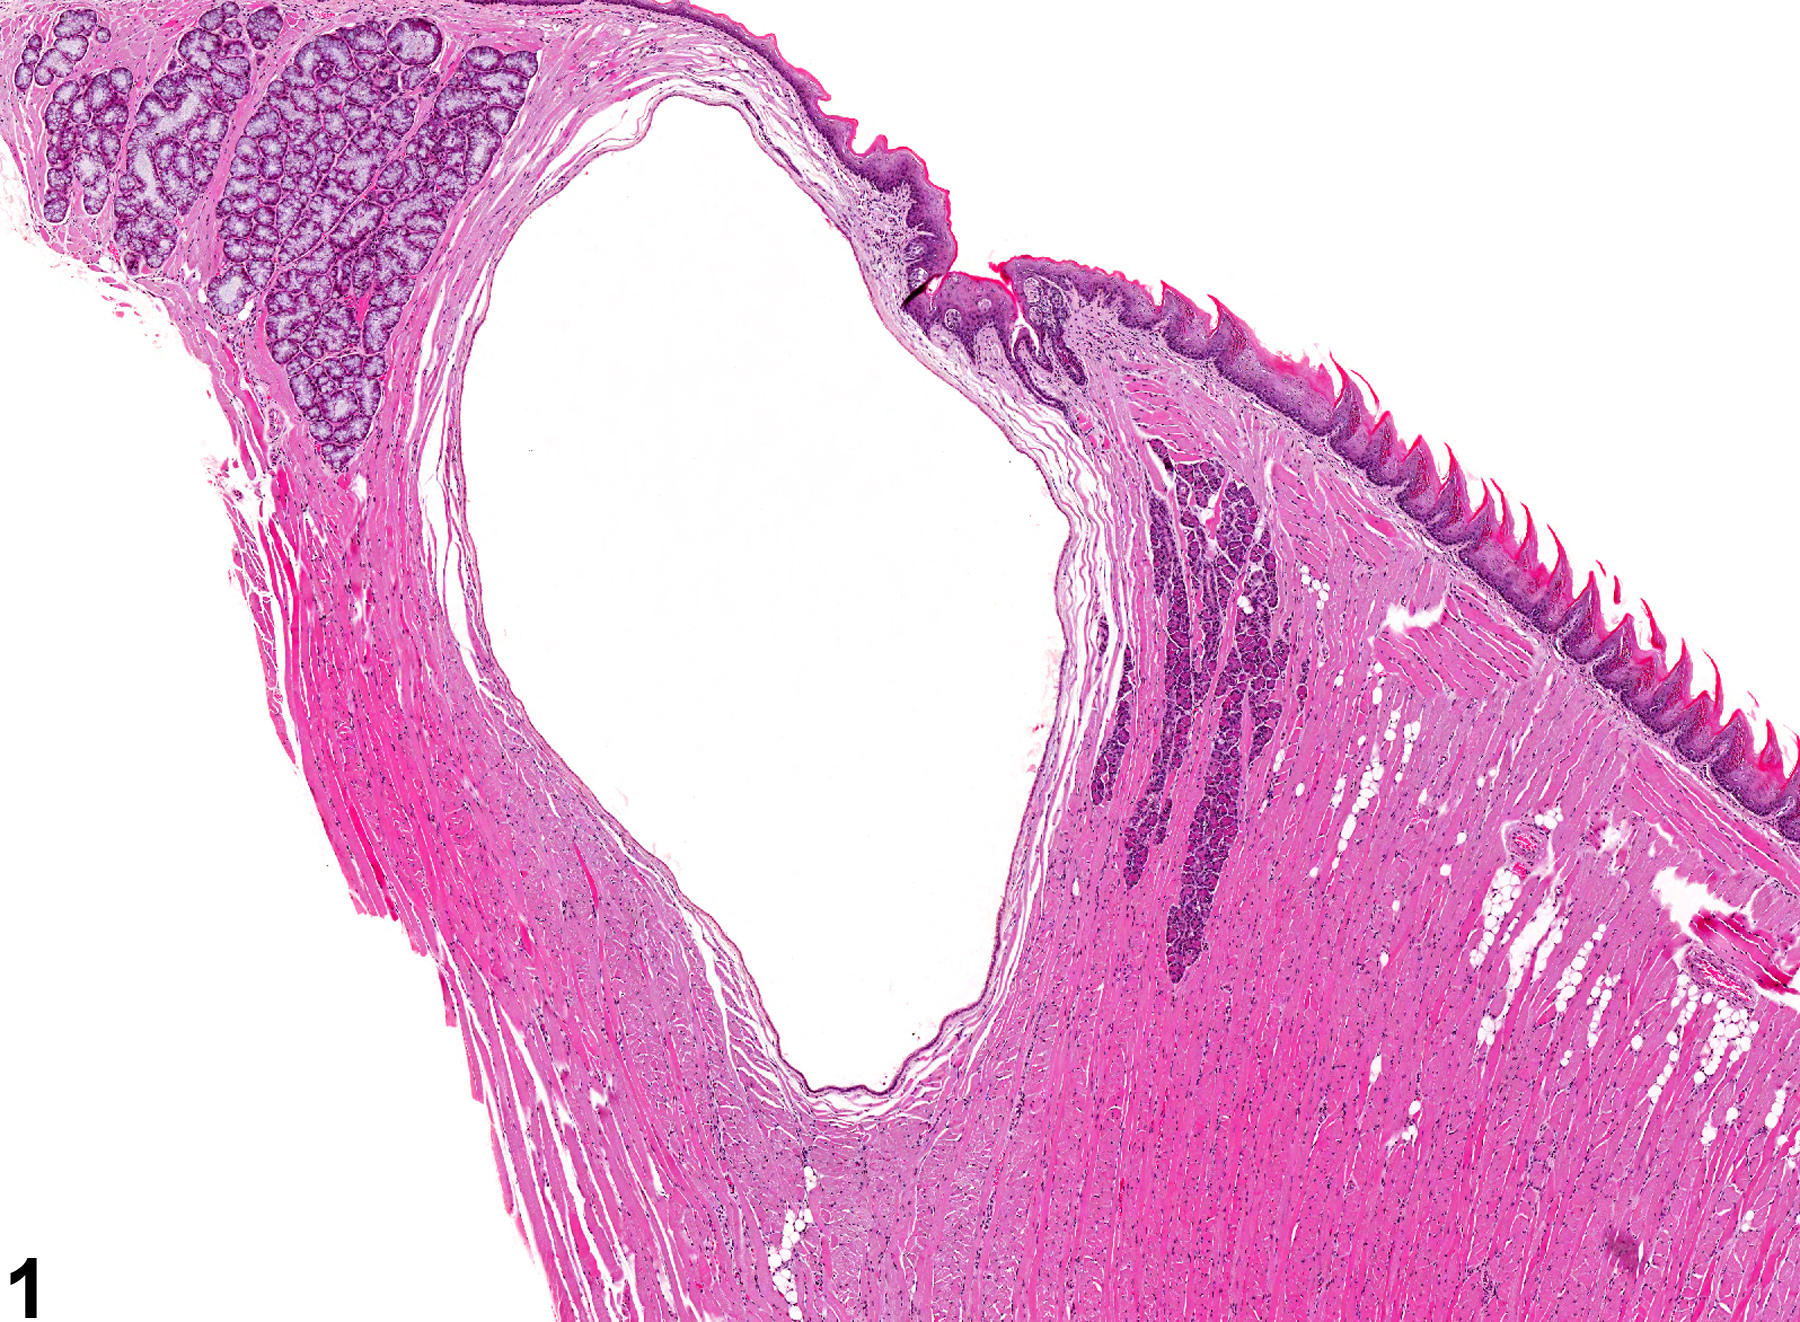 Image of cyst in the tongue glands from a female B6C3F1 mouse in a chronic study